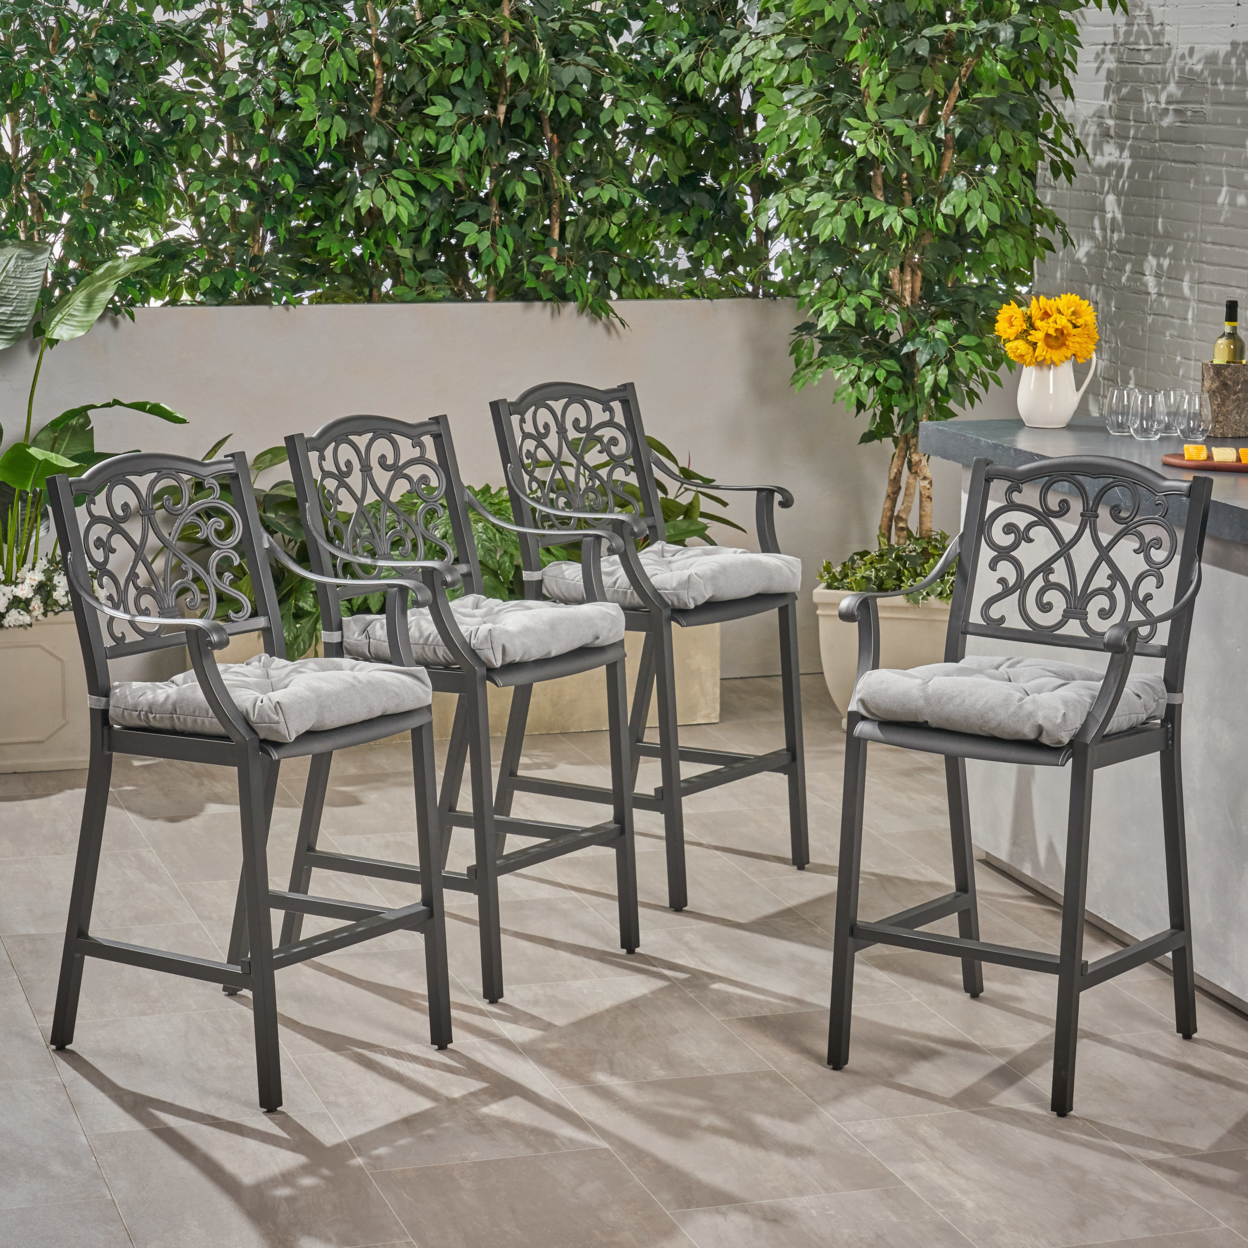 Gwendolyn Outdoor Barstool With Cushion (Set Of 4) Antique Matte Black And Charcoal - Antique Matte Black + Charcoal